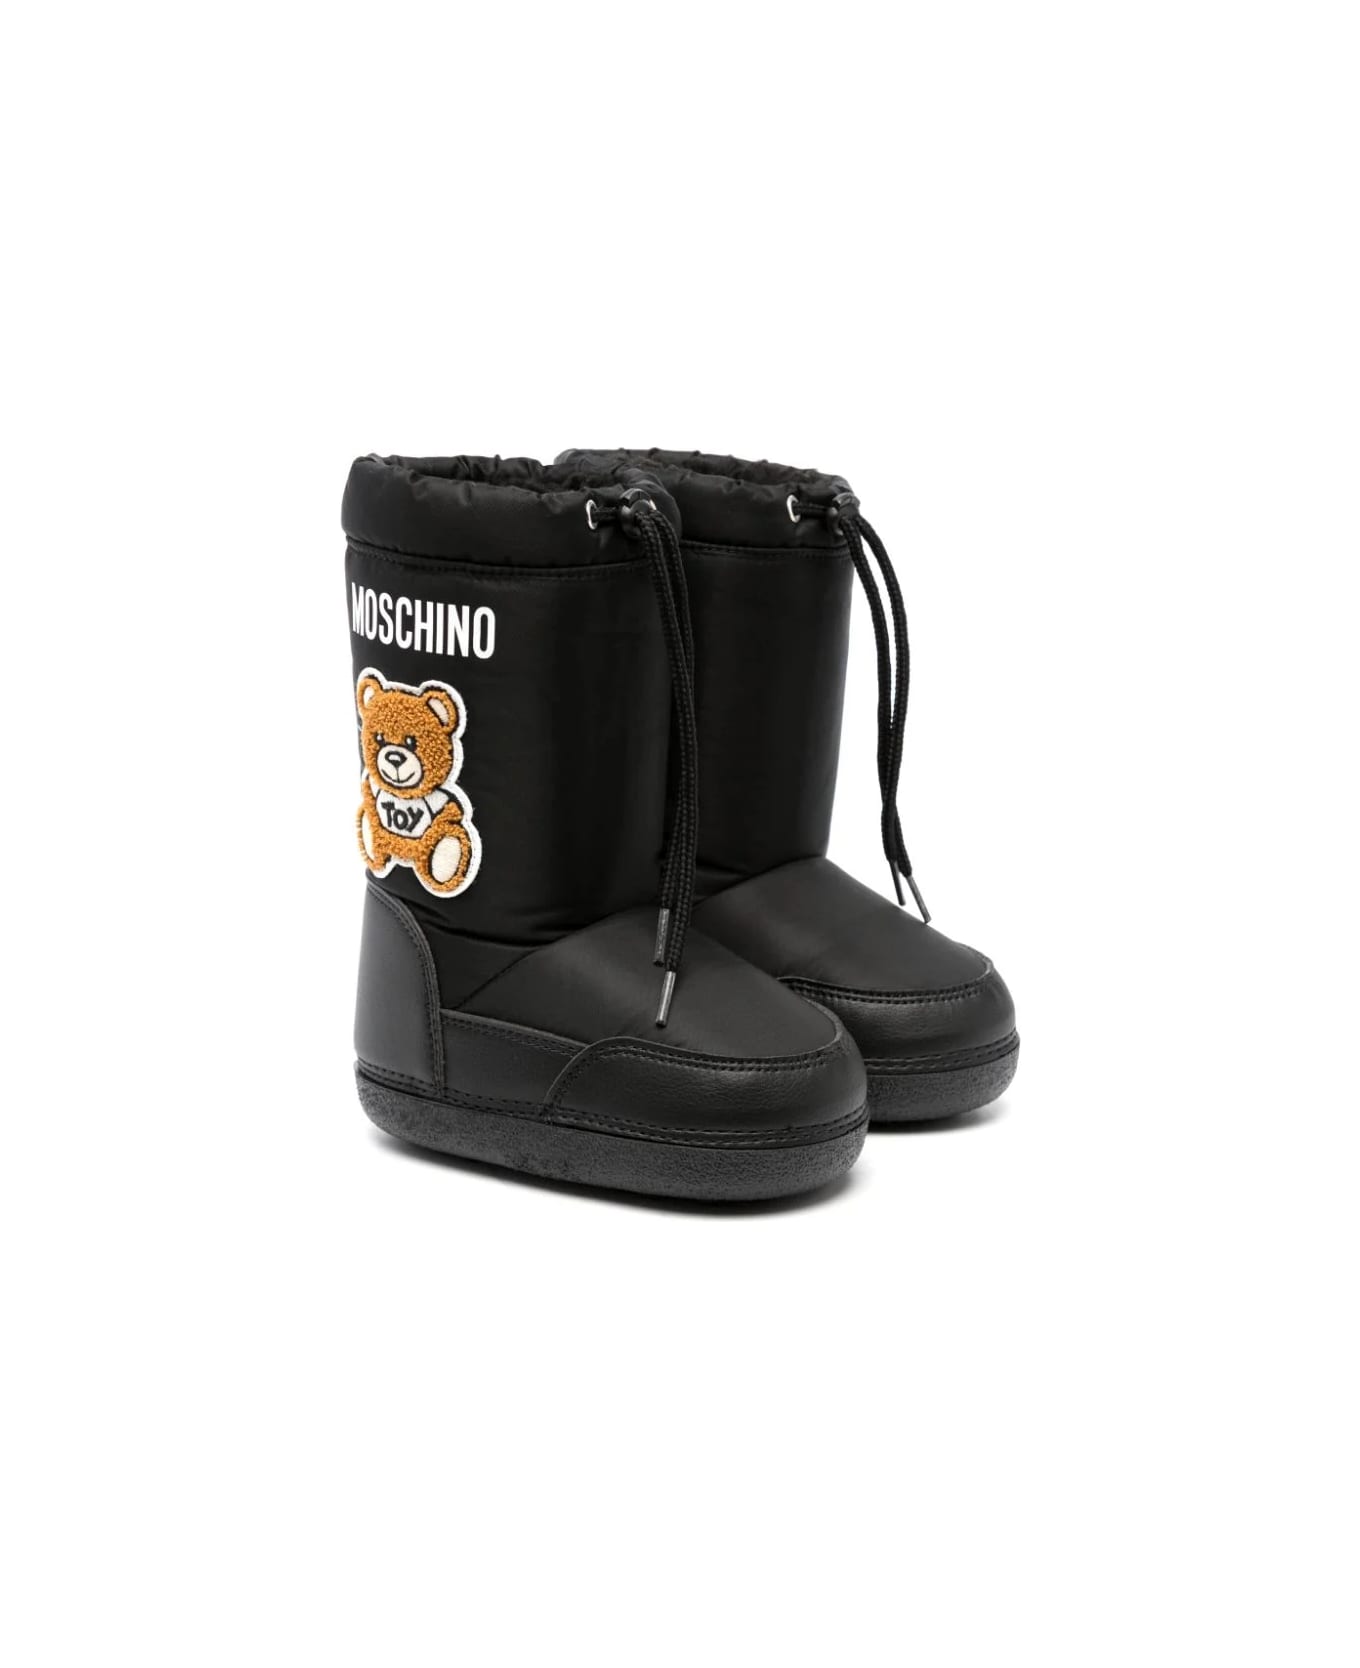 Moschino Teddy Bear Patch Snow Boots - Black